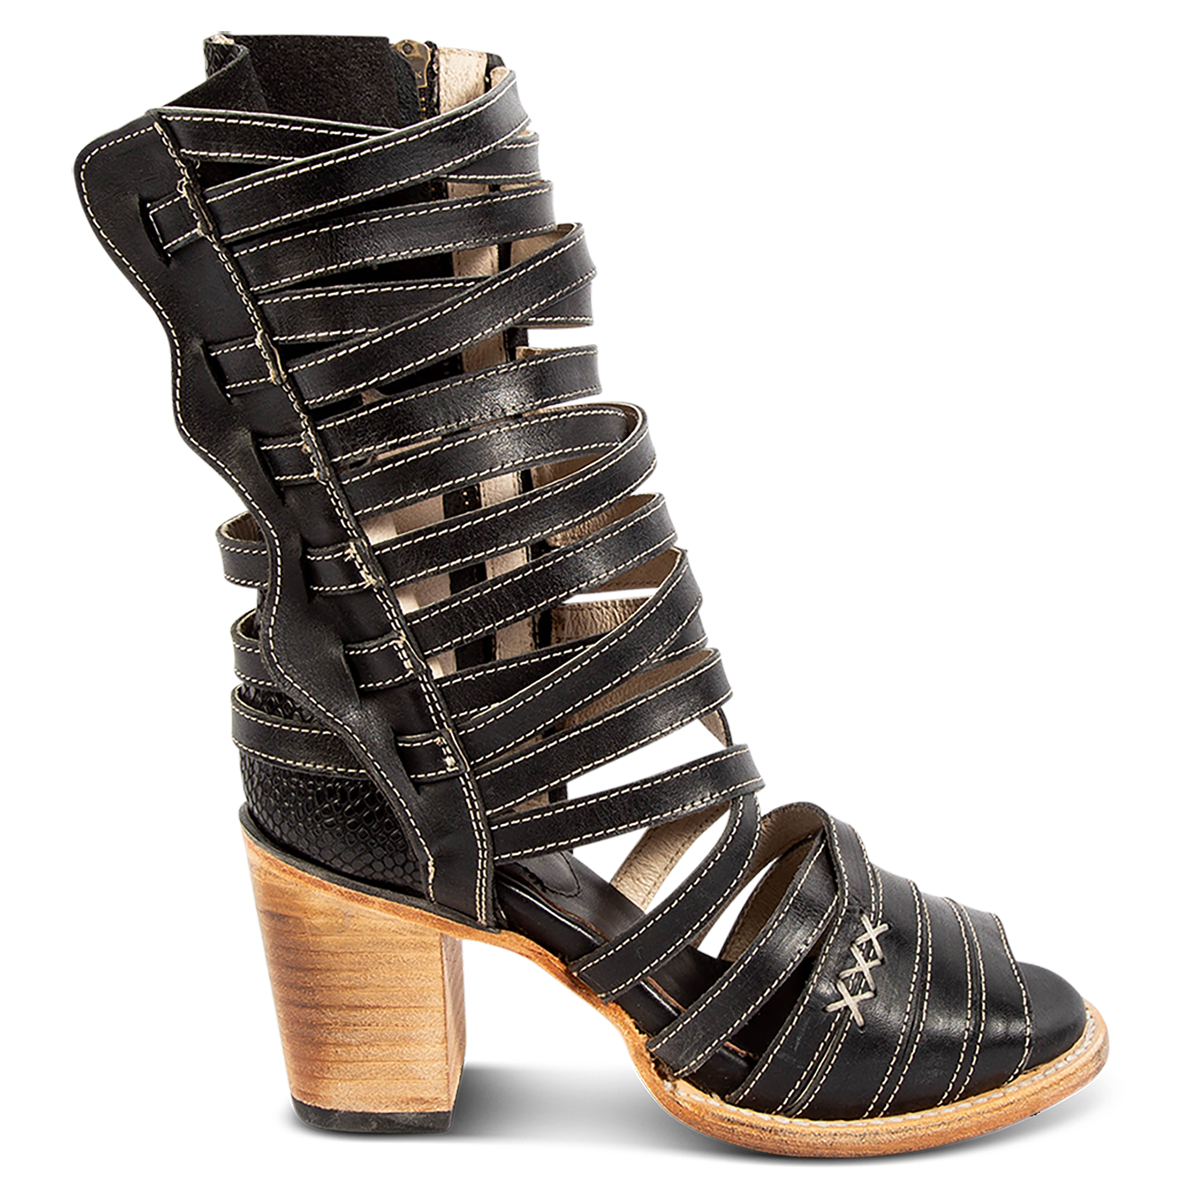 FREEBIRD women's Makayla black leather sandal with adjustable back paneling, an inside working zip closure and leather straps